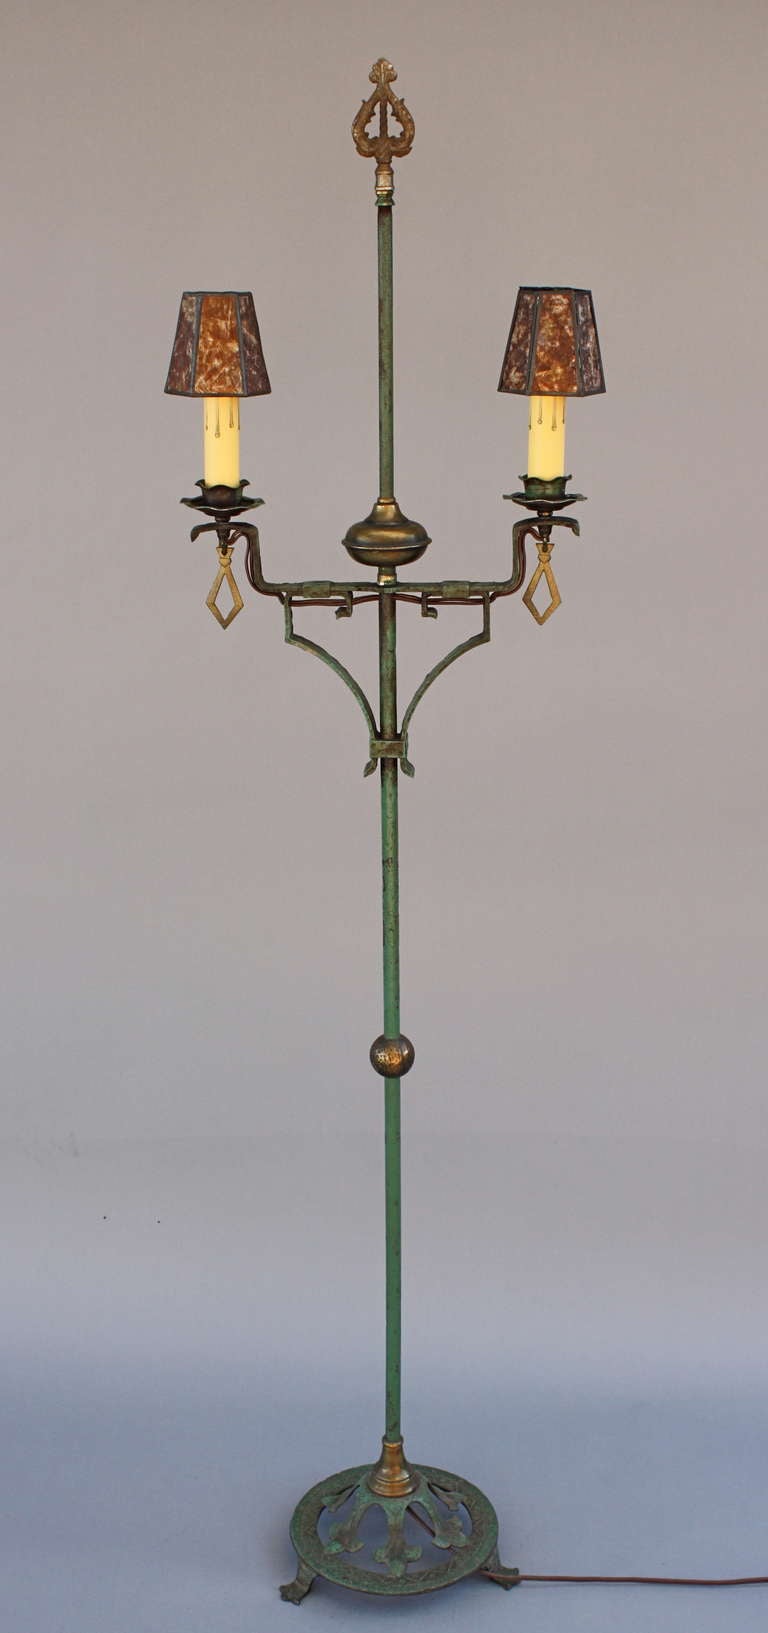 Beautiful 1920's floor lamp with original finish.  Features two contemporary mica clip-on shades.